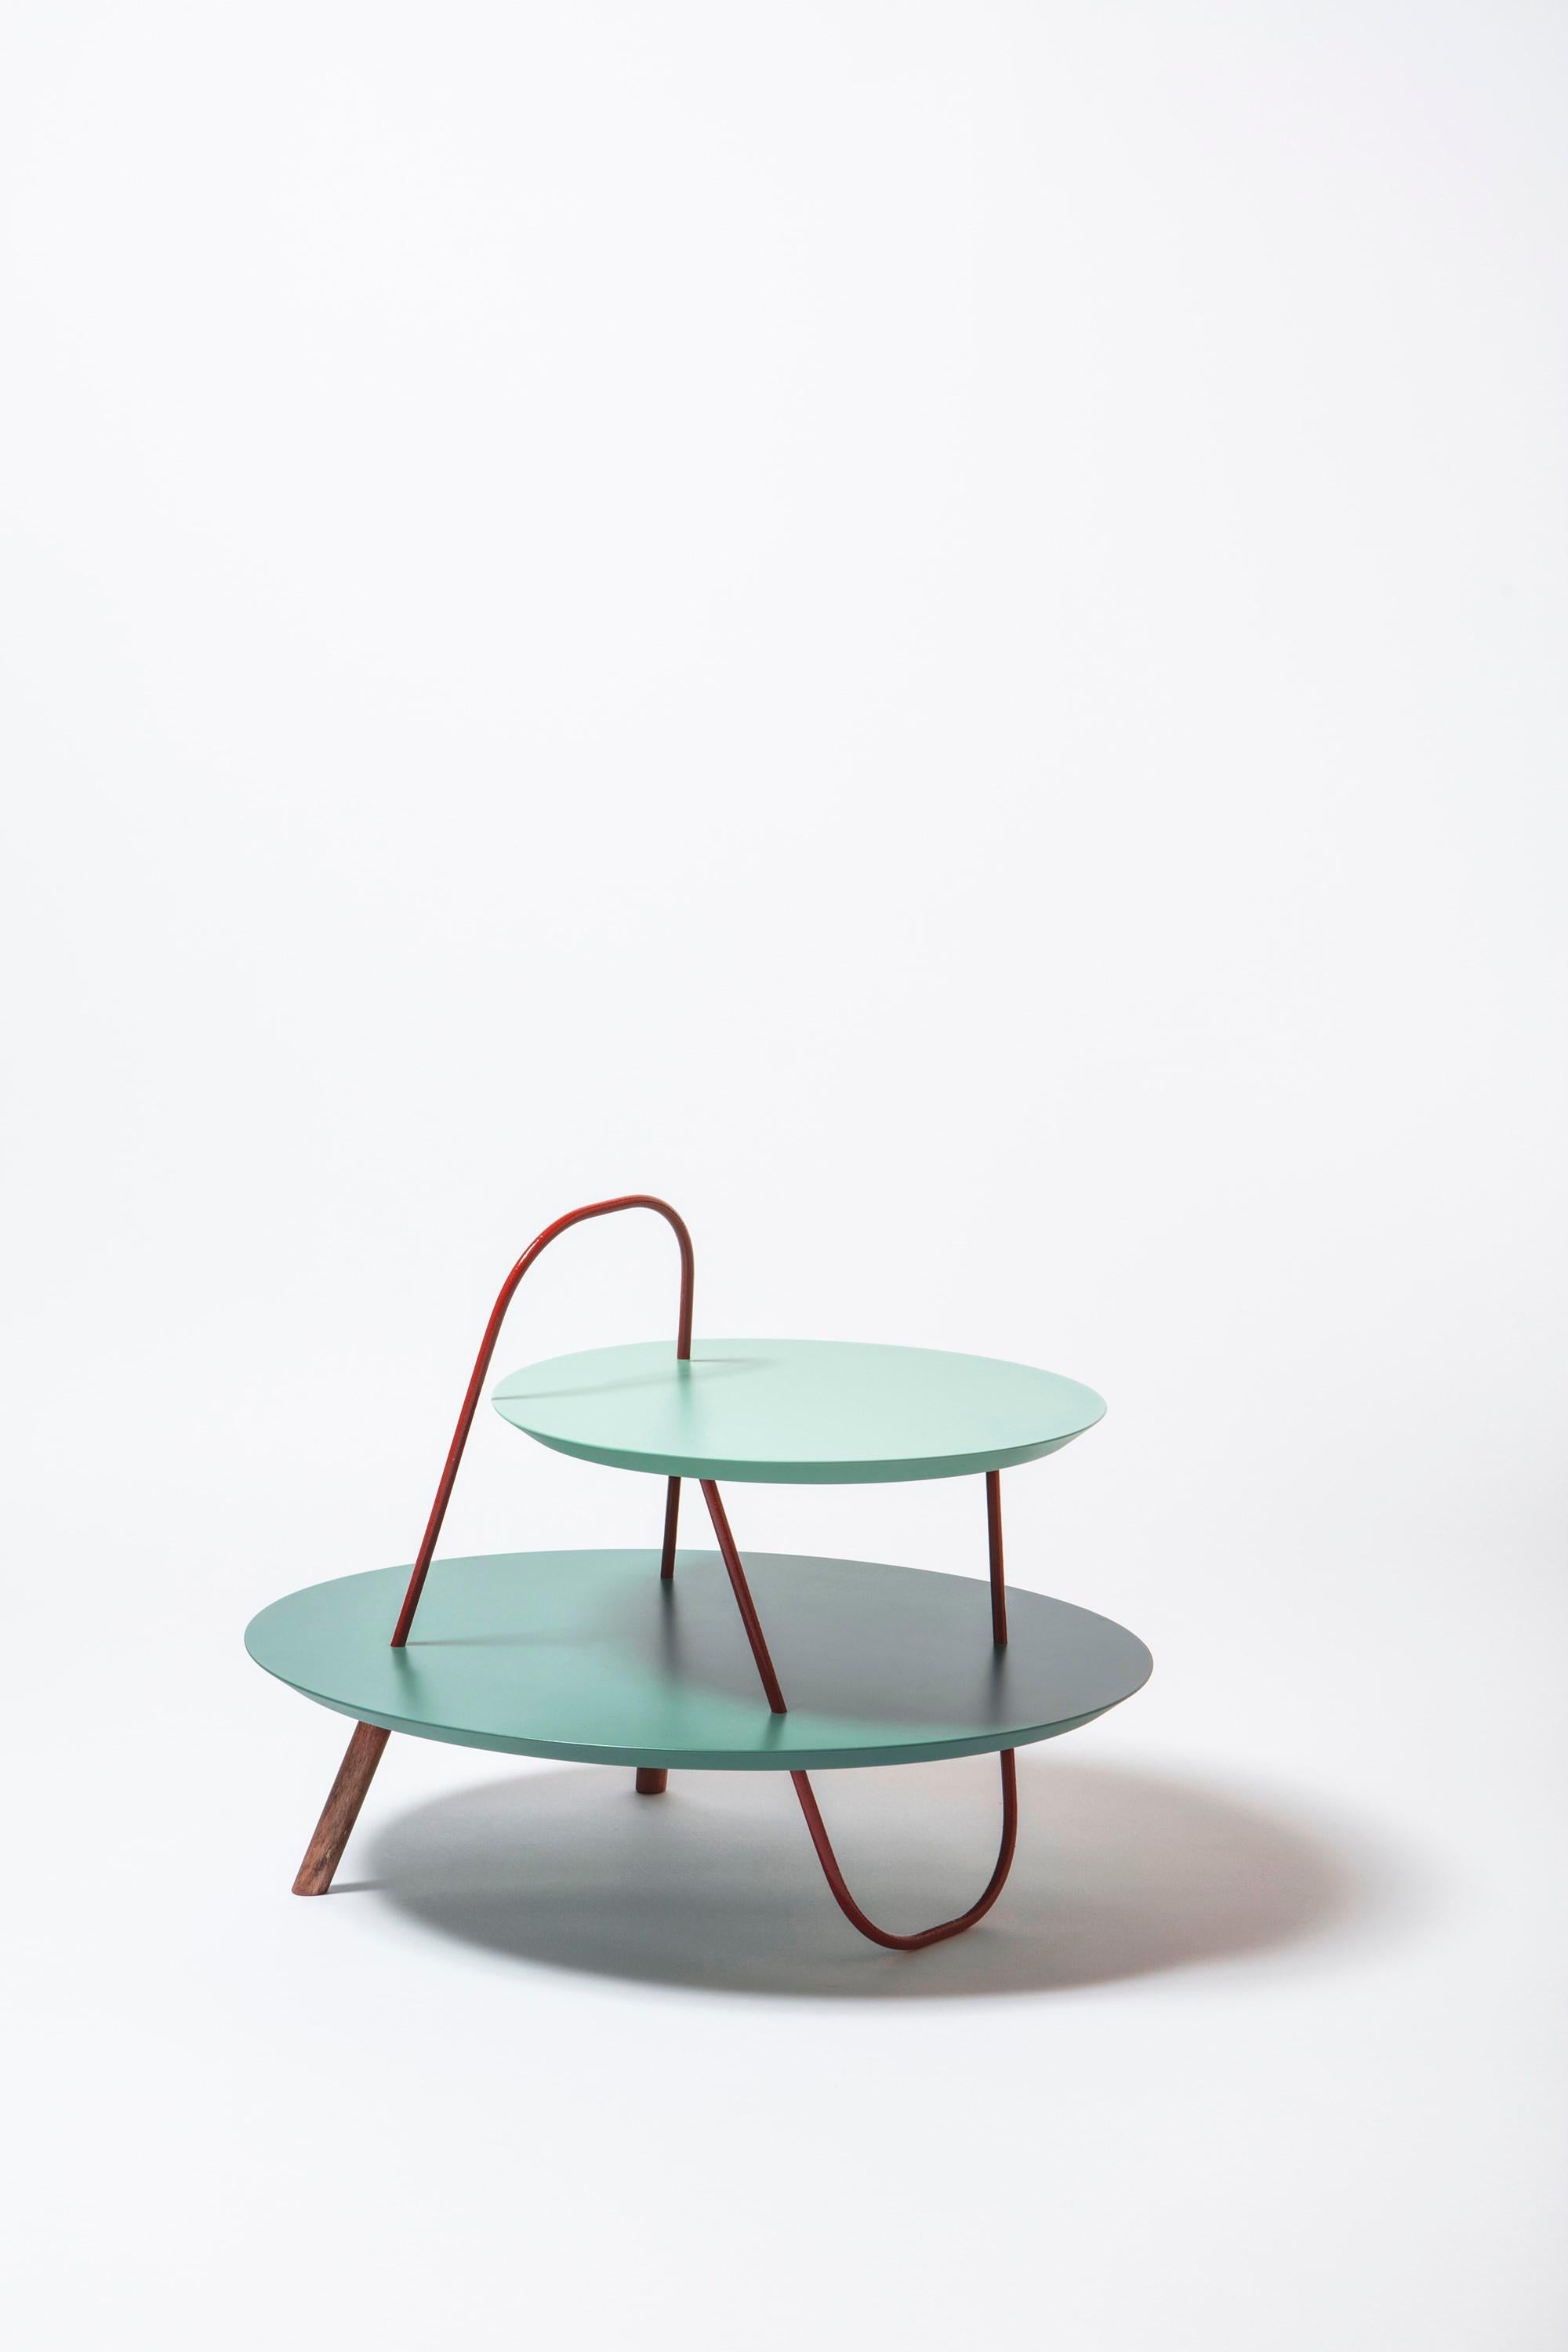 As free trajectories in space, metal structures create winding geometries. ORBIT is a family of tables with a unique image. Curved tubulars cross - on several levels – with circular or elliptical wooden tops.
Design by Accardi Buccheri for